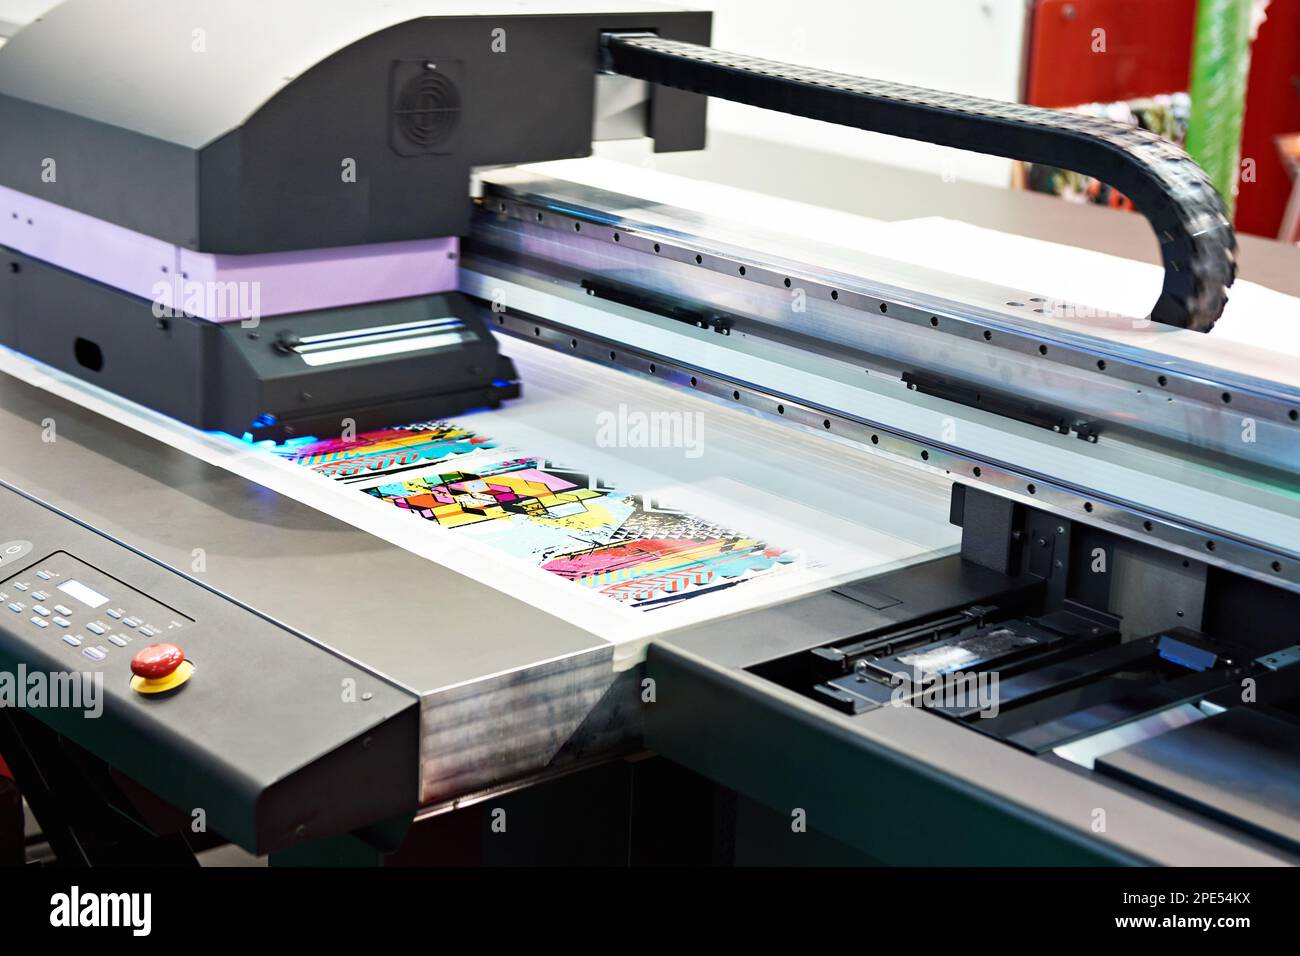 Industrial large format printer in work Stock Photo